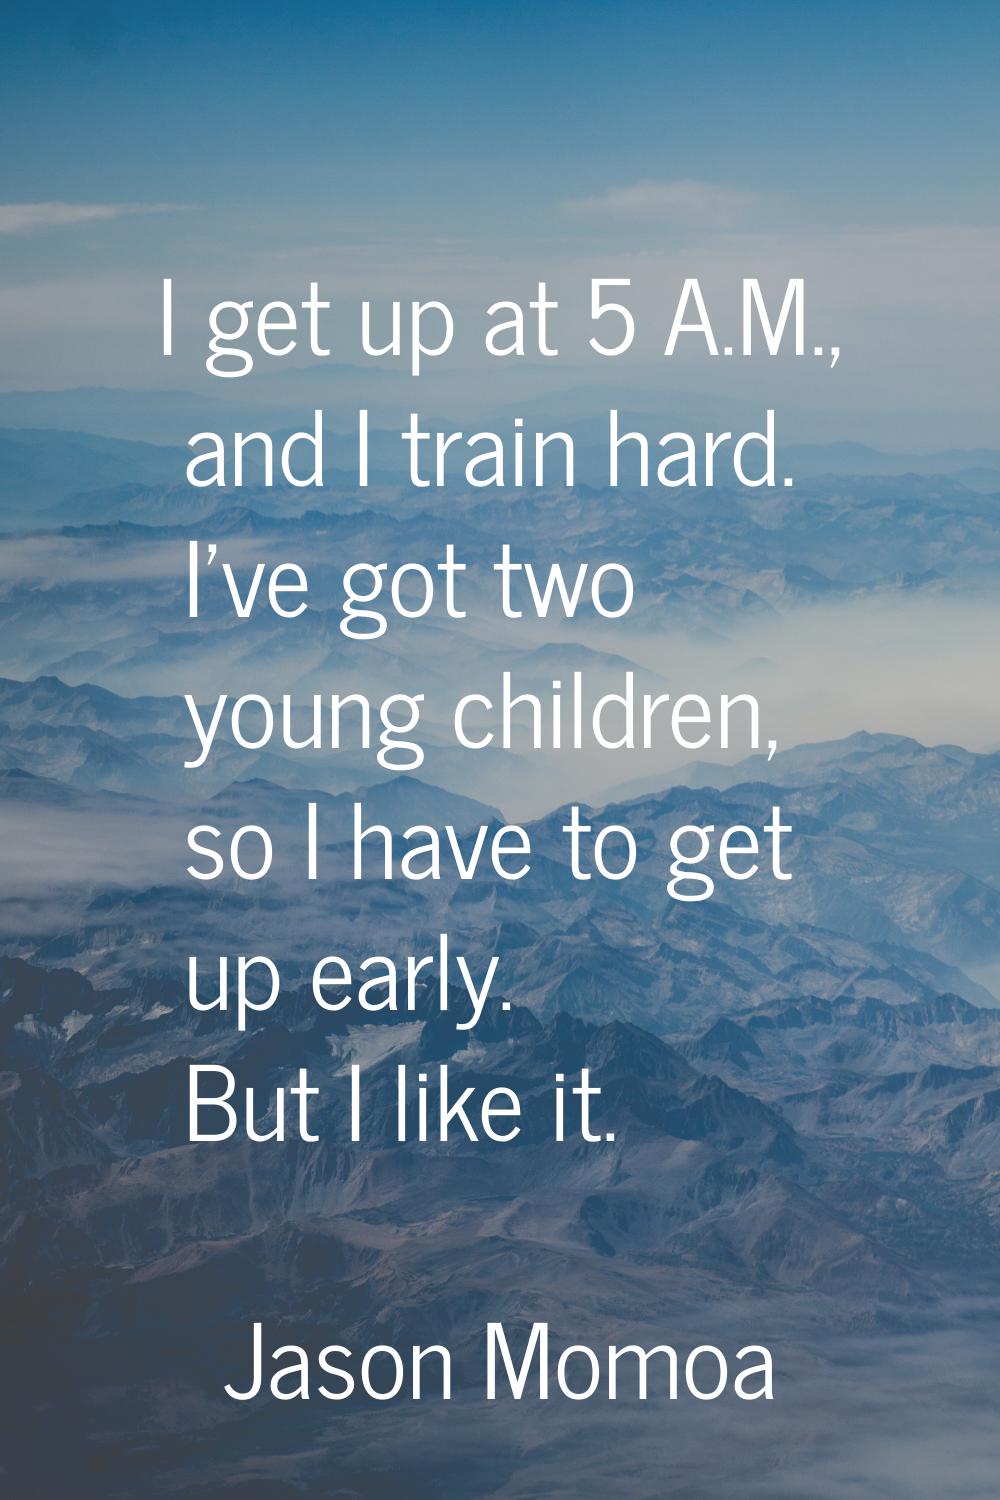 I get up at 5 A.M., and I train hard. I've got two young children, so I have to get up early. But I